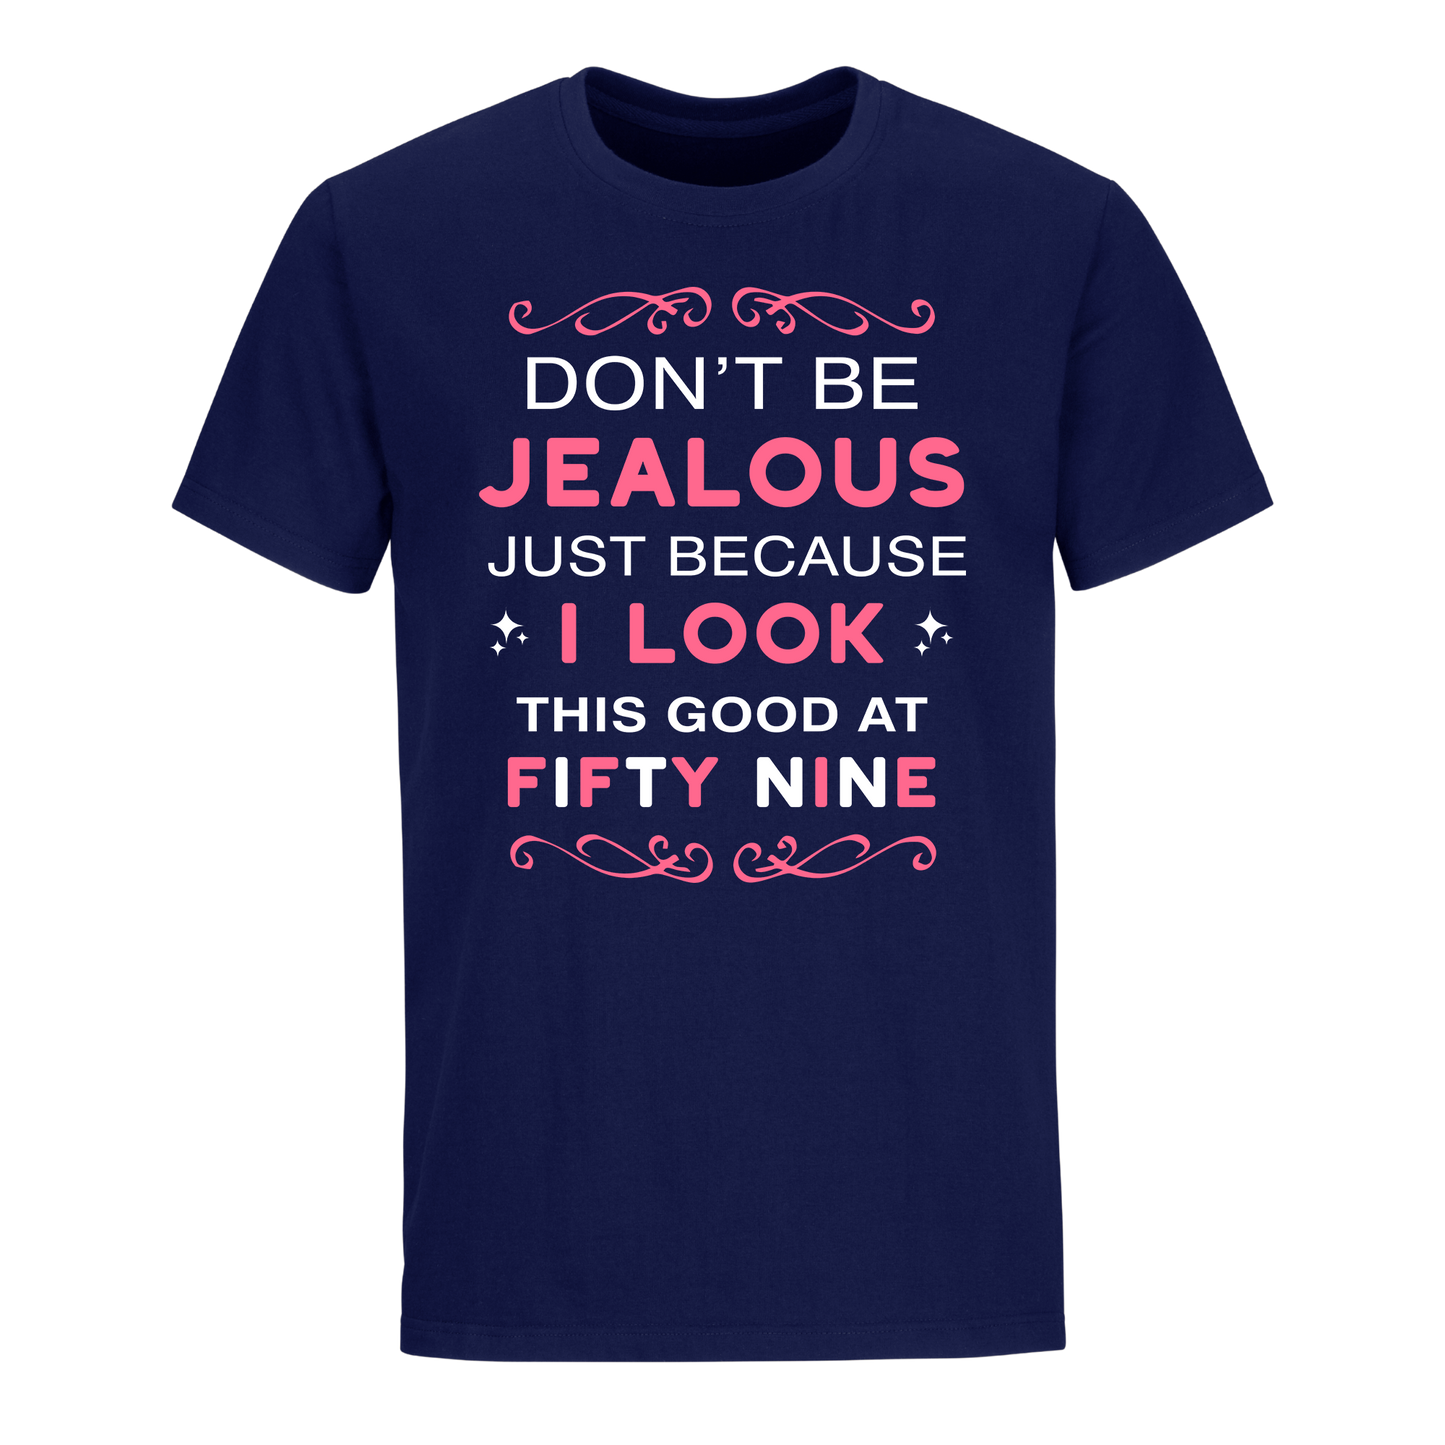 DON'T BE JEALOUS JUST BECAUSE I LOOK THIS GOOD AT 59 UNISEX SHIRT